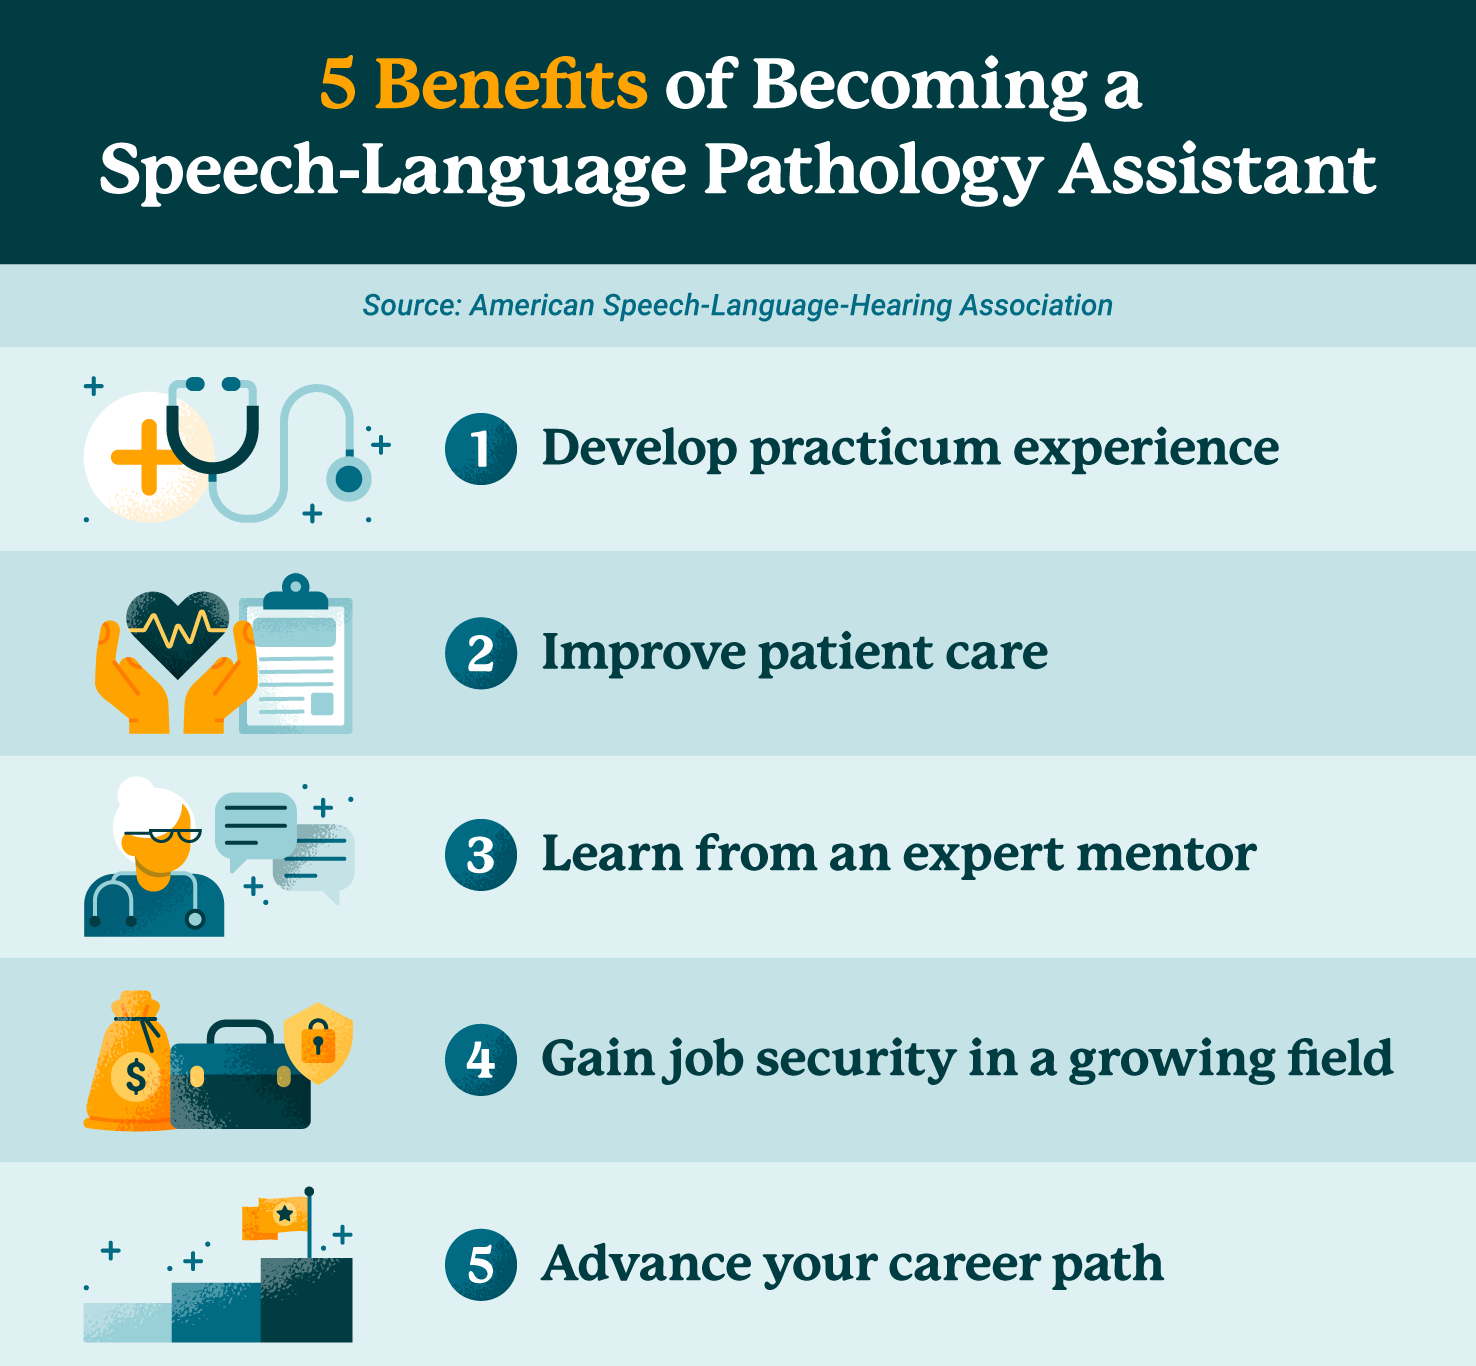 List of 5 benefits of becoming a speech-language pathology assistant